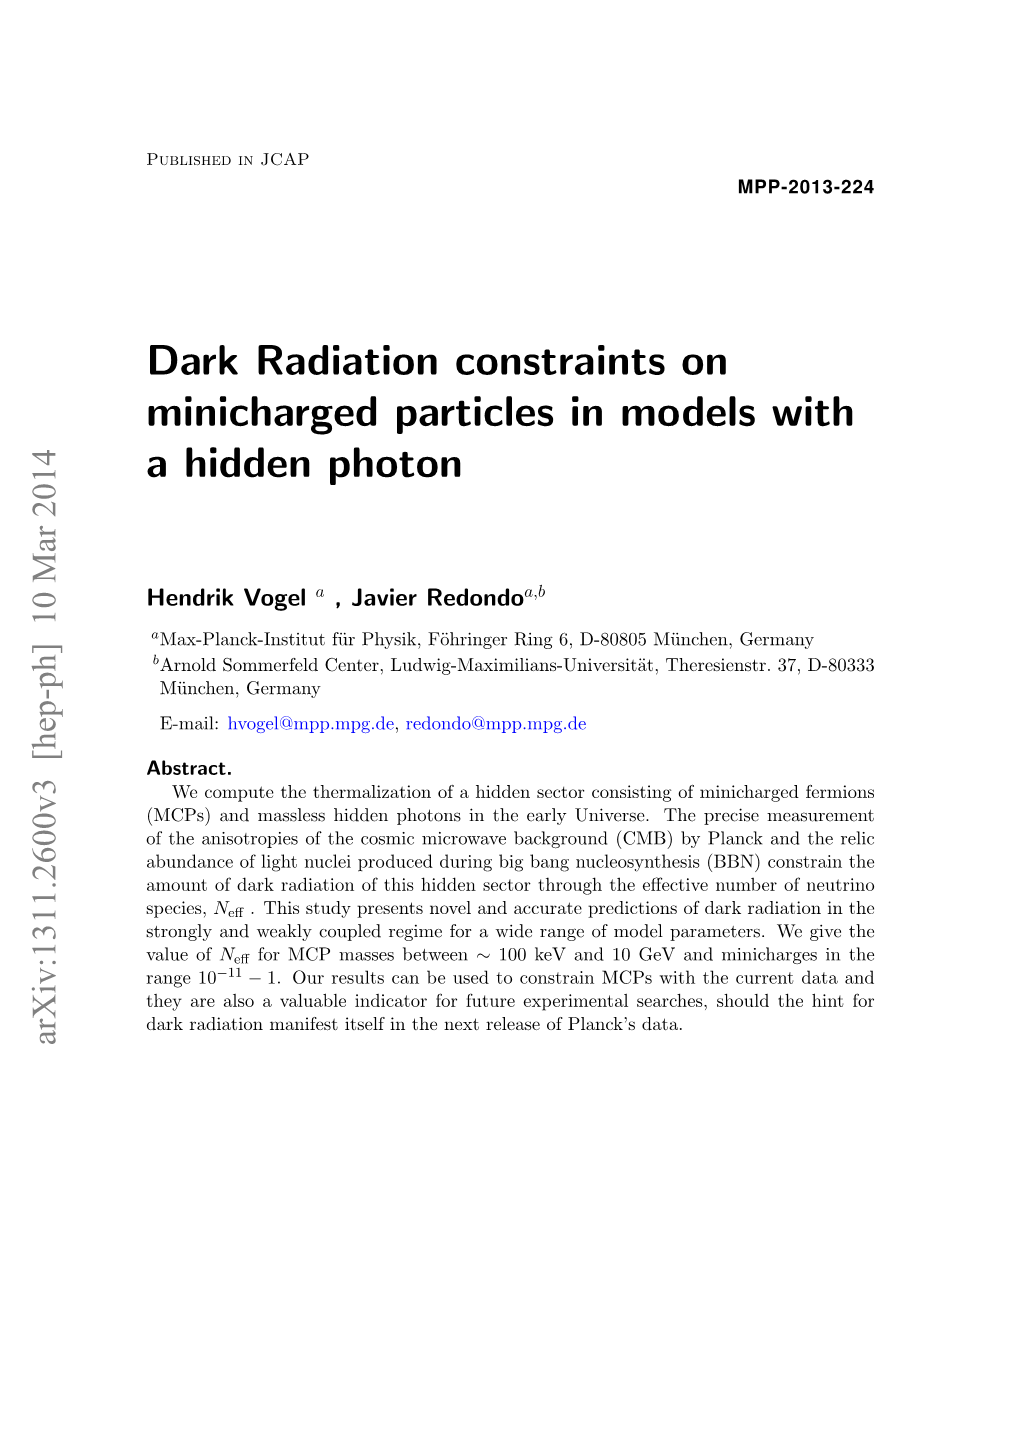 Dark Radiation Constraints on Minicharged Particles in Models with a Hidden Photon